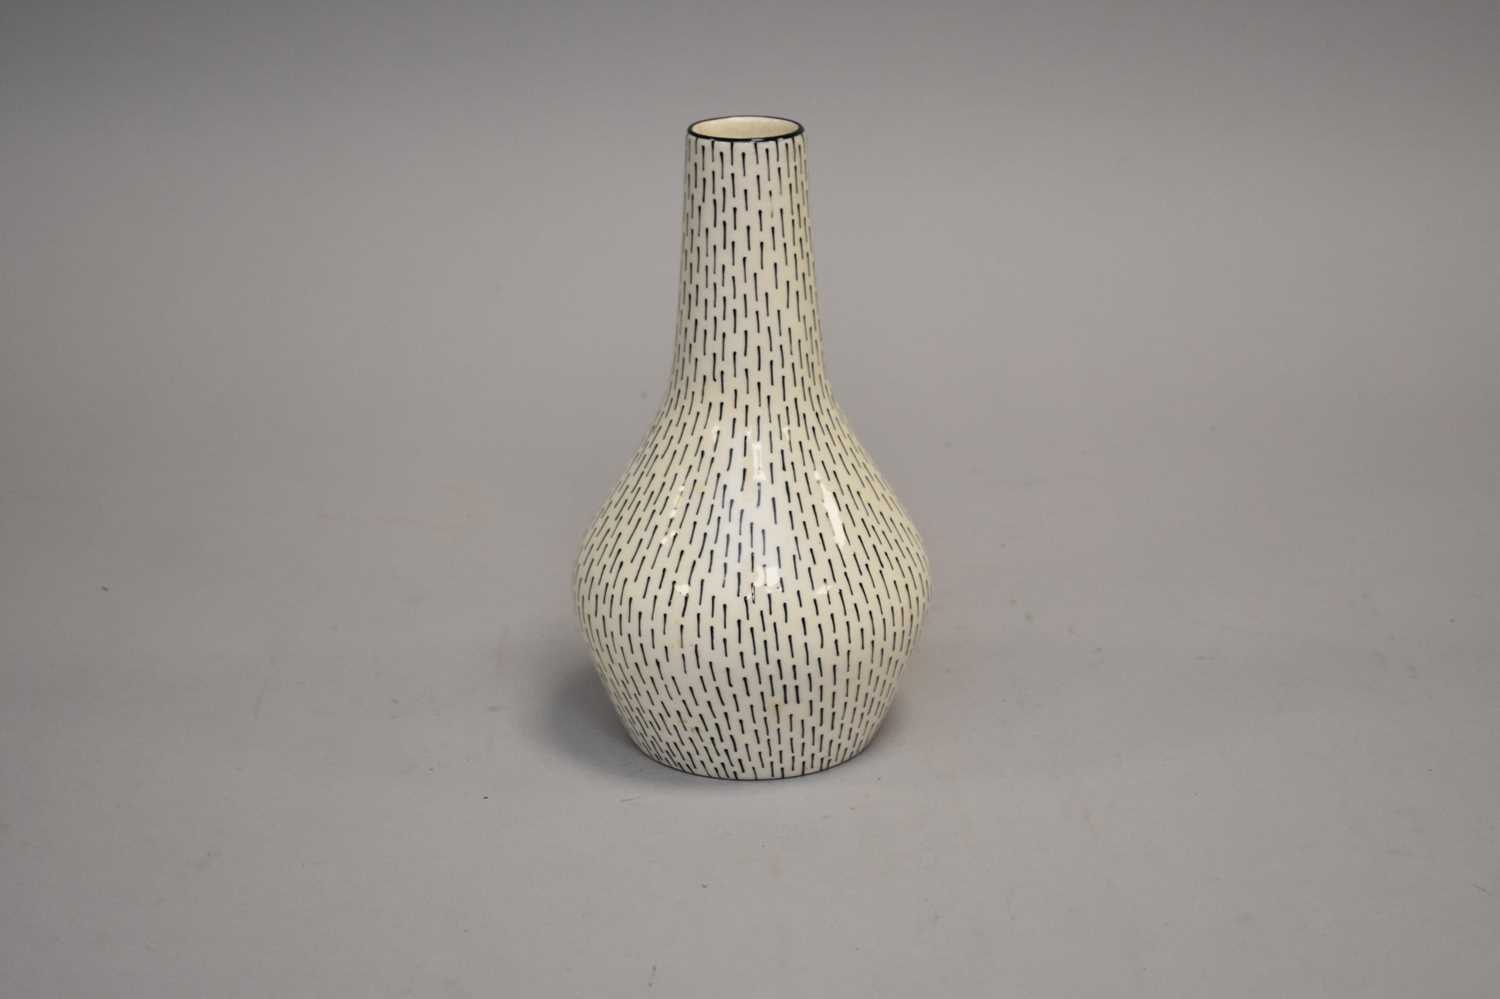 Midwinter Pottery vase designed by Jessie Tait